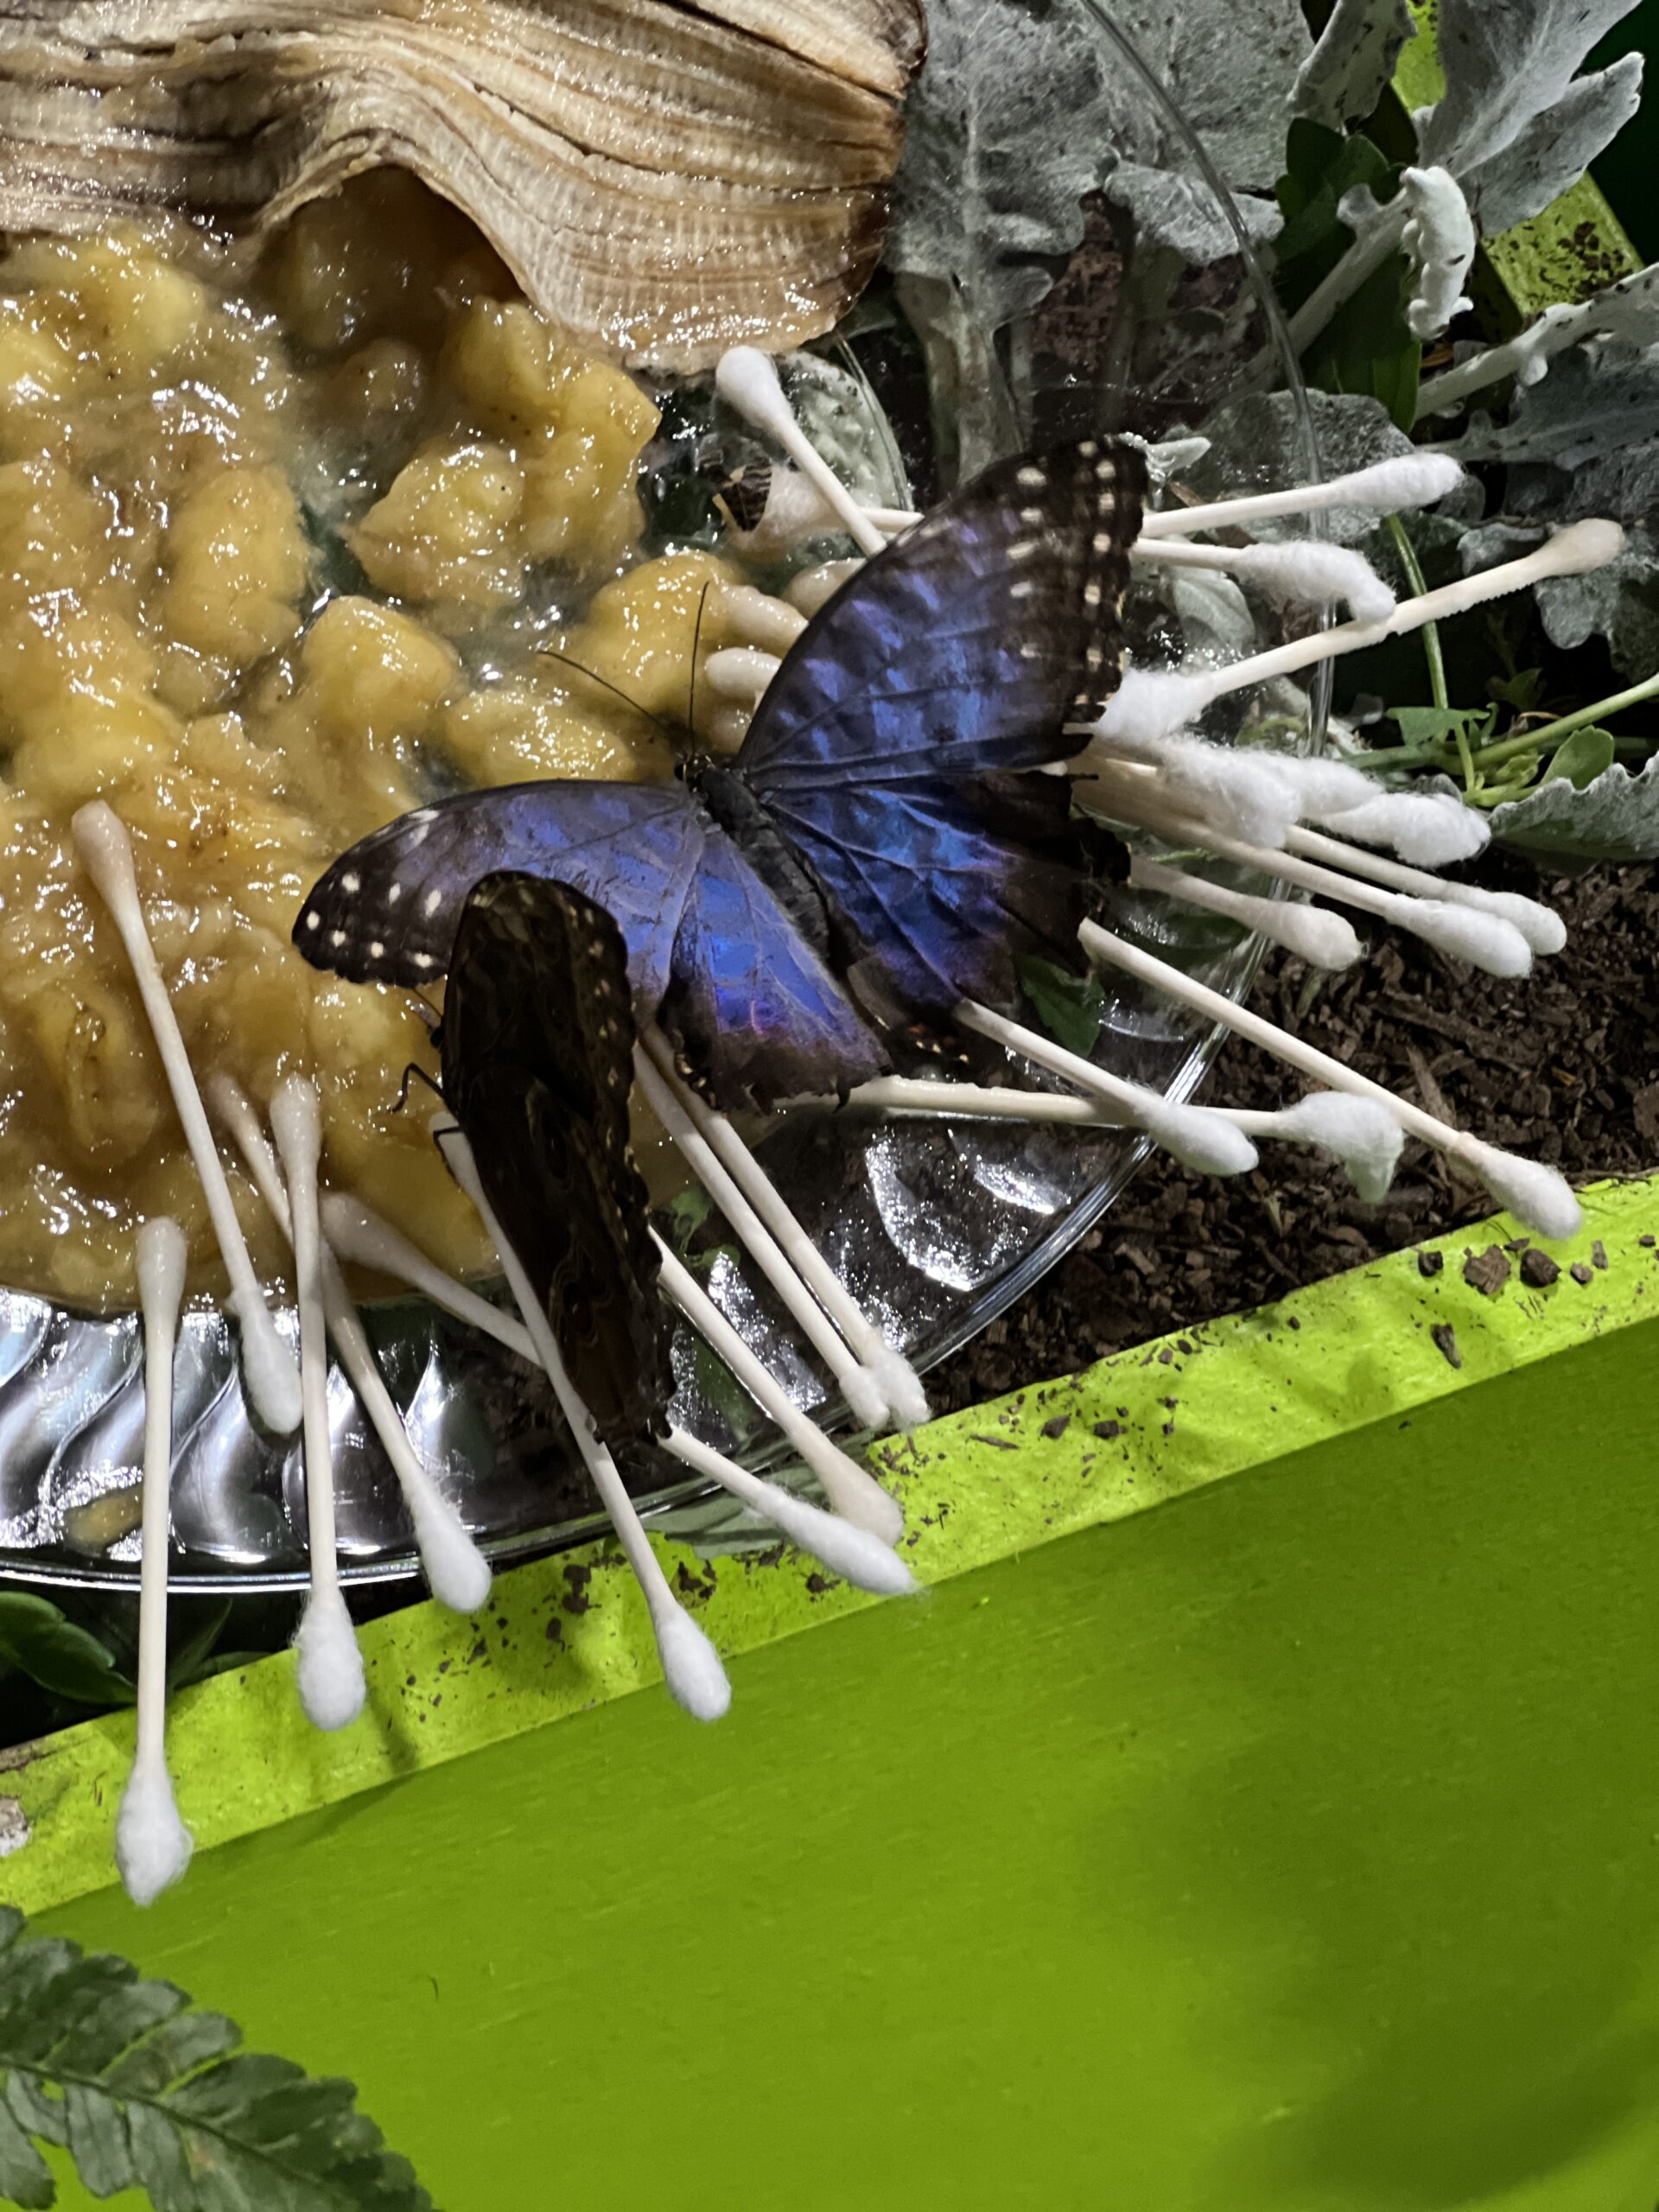 Butterfly from butterflies live, a kid activity at the Philadelphia Show